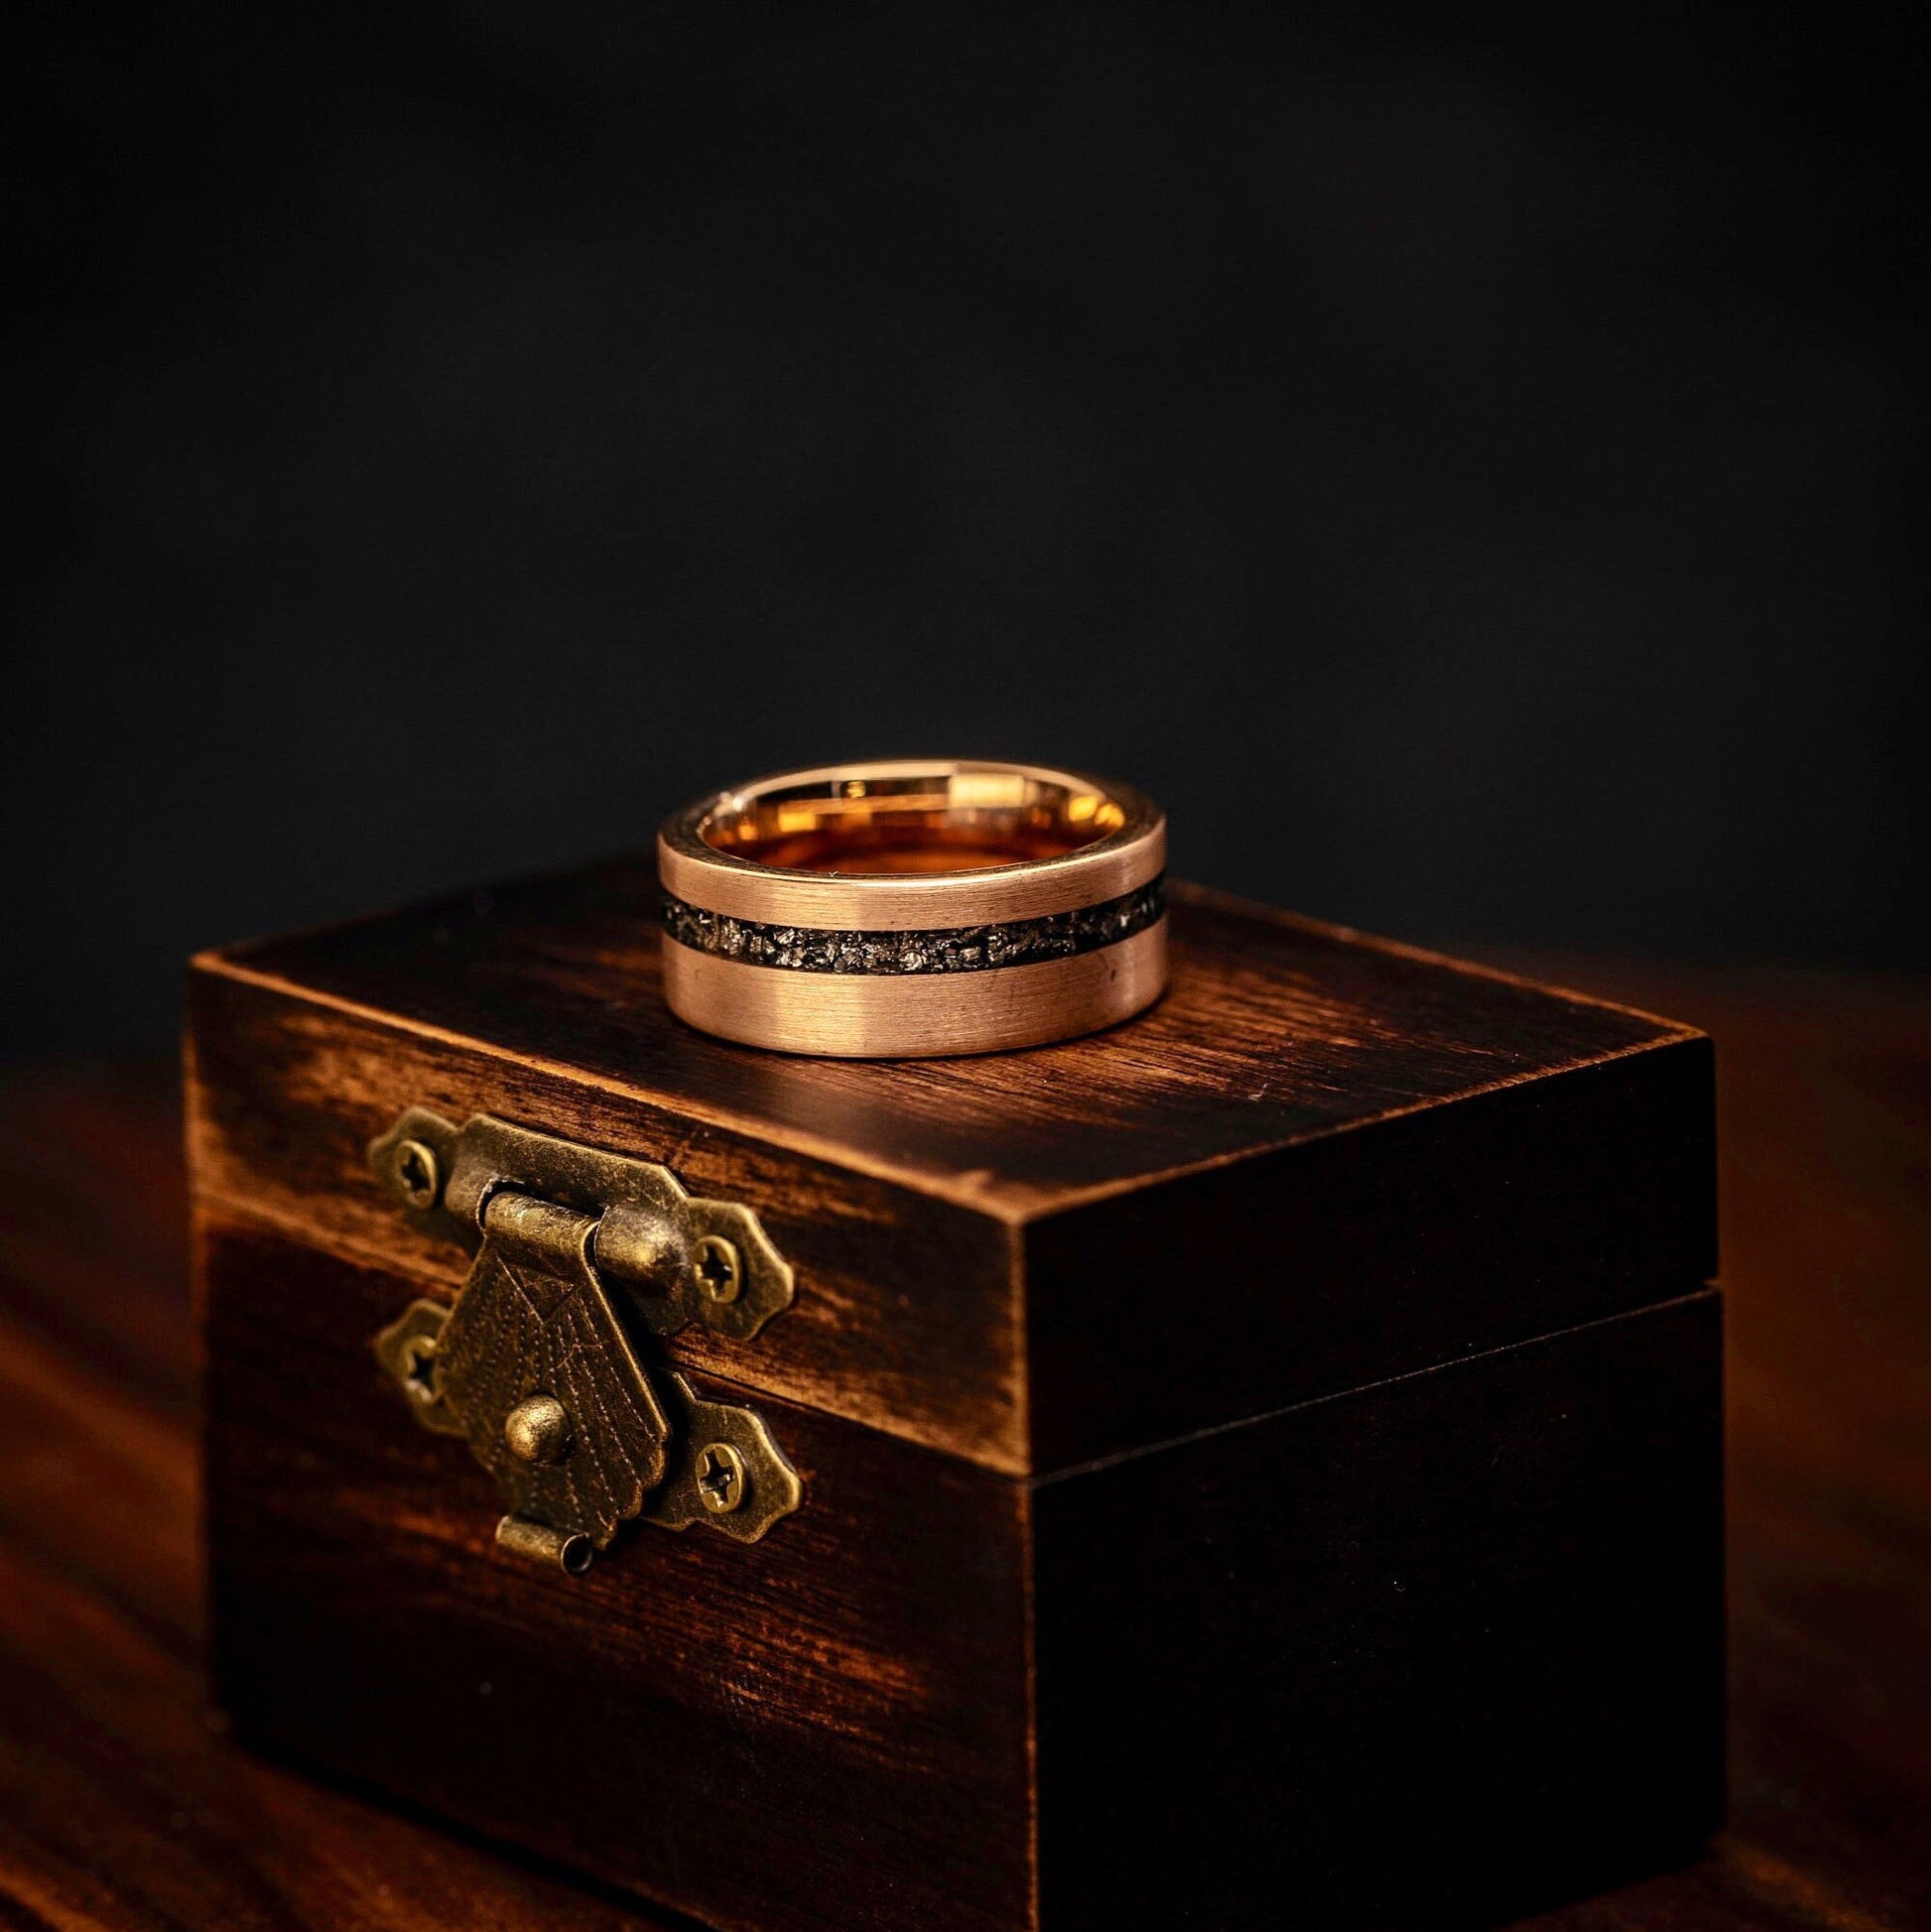 Couples wedding ring set showcasing the beauty of real meteorite and rose gold.